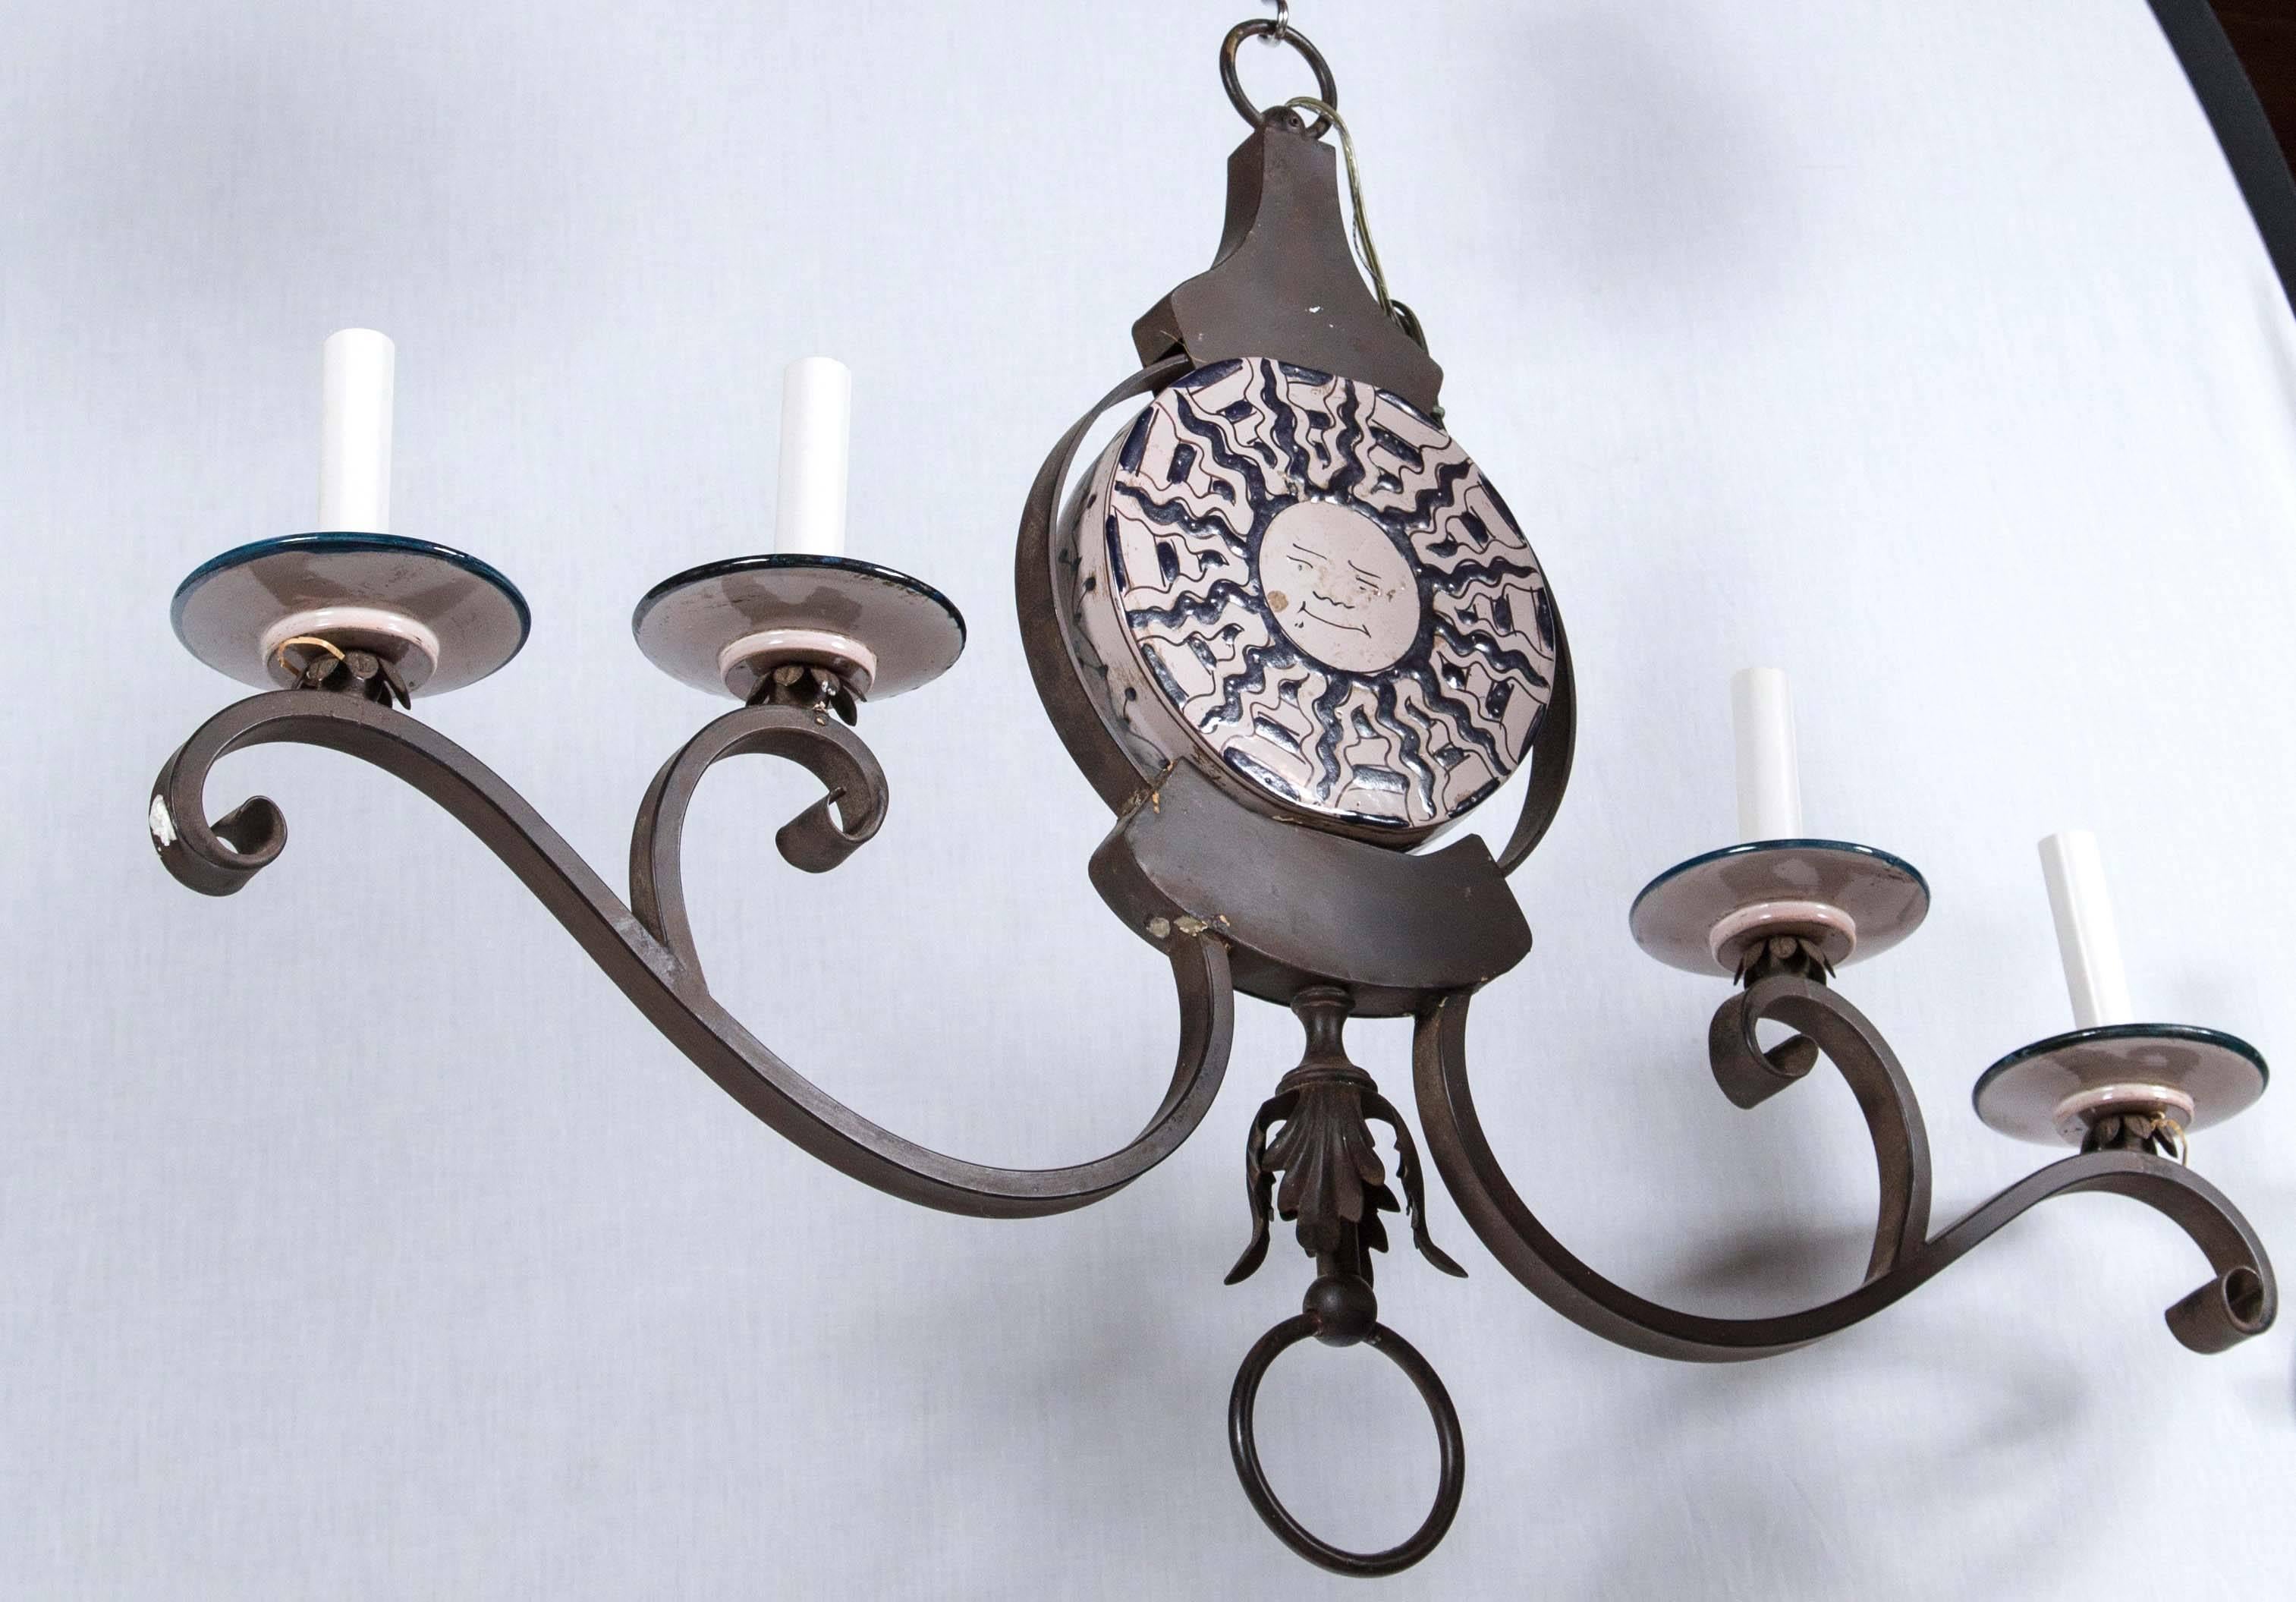 Banci sun face chandelier wrought iron with four lights. New old stock.
 